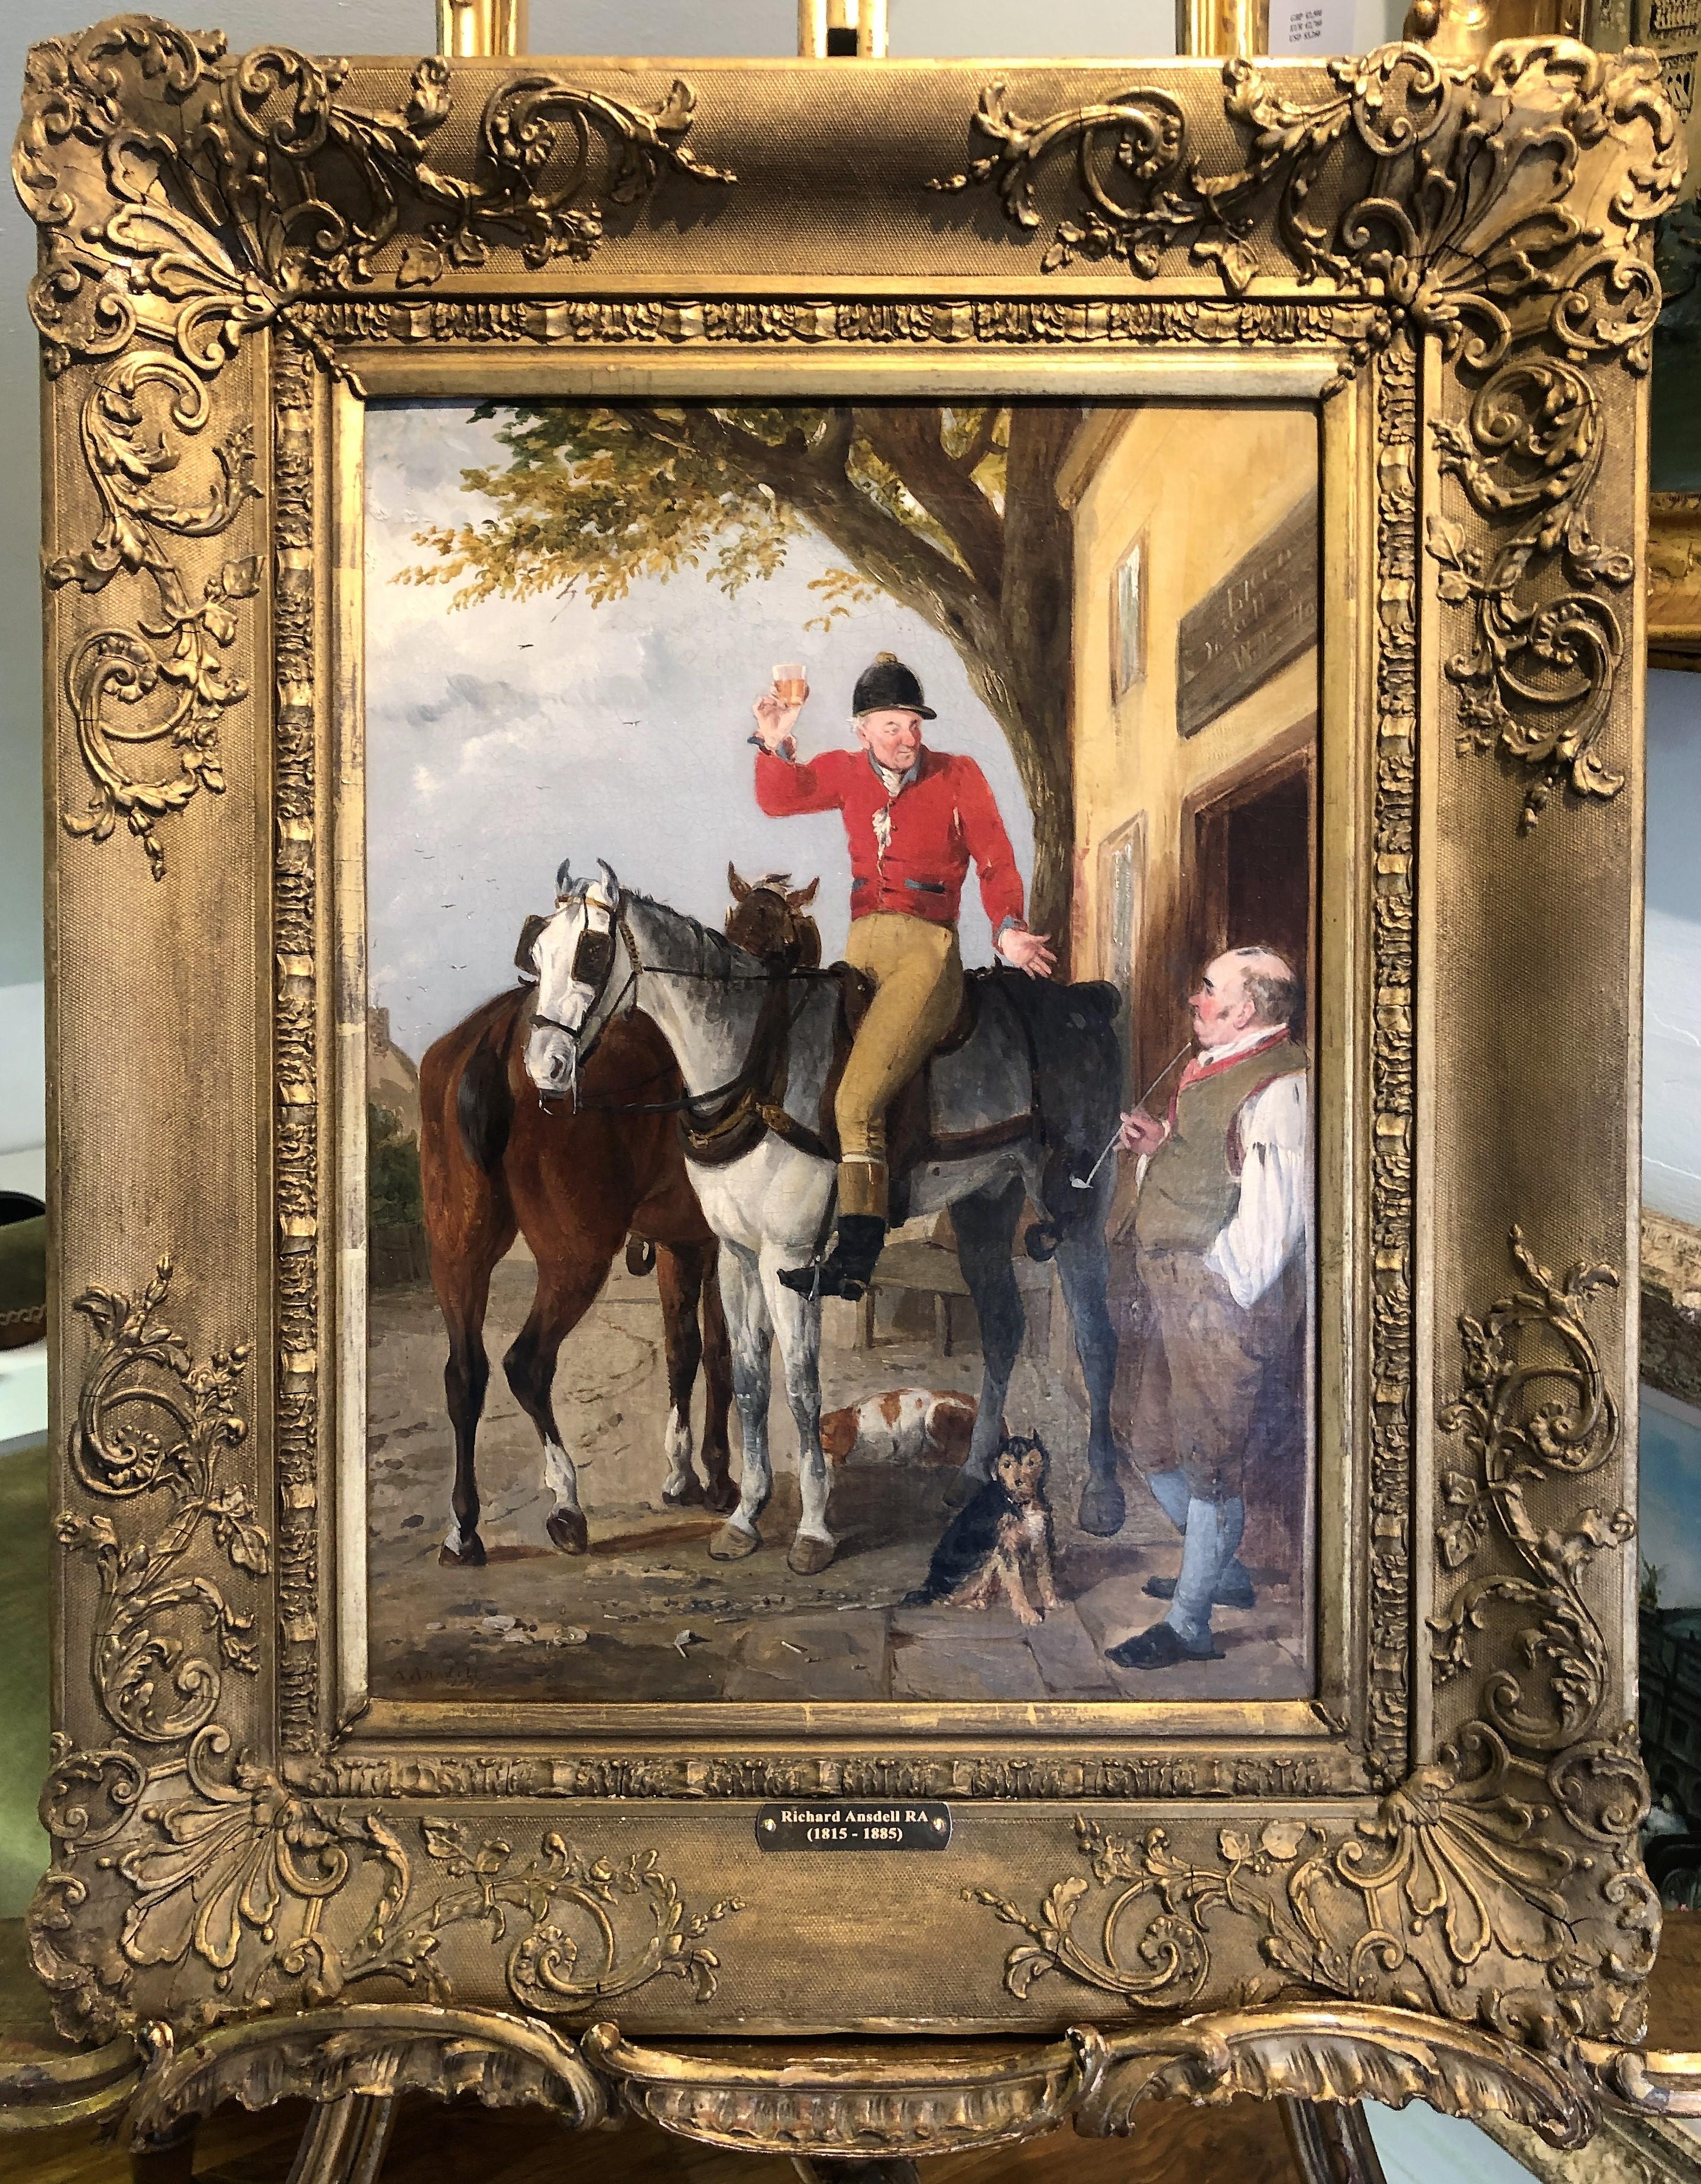 OIL PAINTING Antique 19th Century British old master in a Gold Gilt Frame
Description

Good condition Canvas , Professional Cleaned & relined ,  

Frame Is original and in very good condition

"see pictures”

FINE OLD MASTER British OIL PAINTING